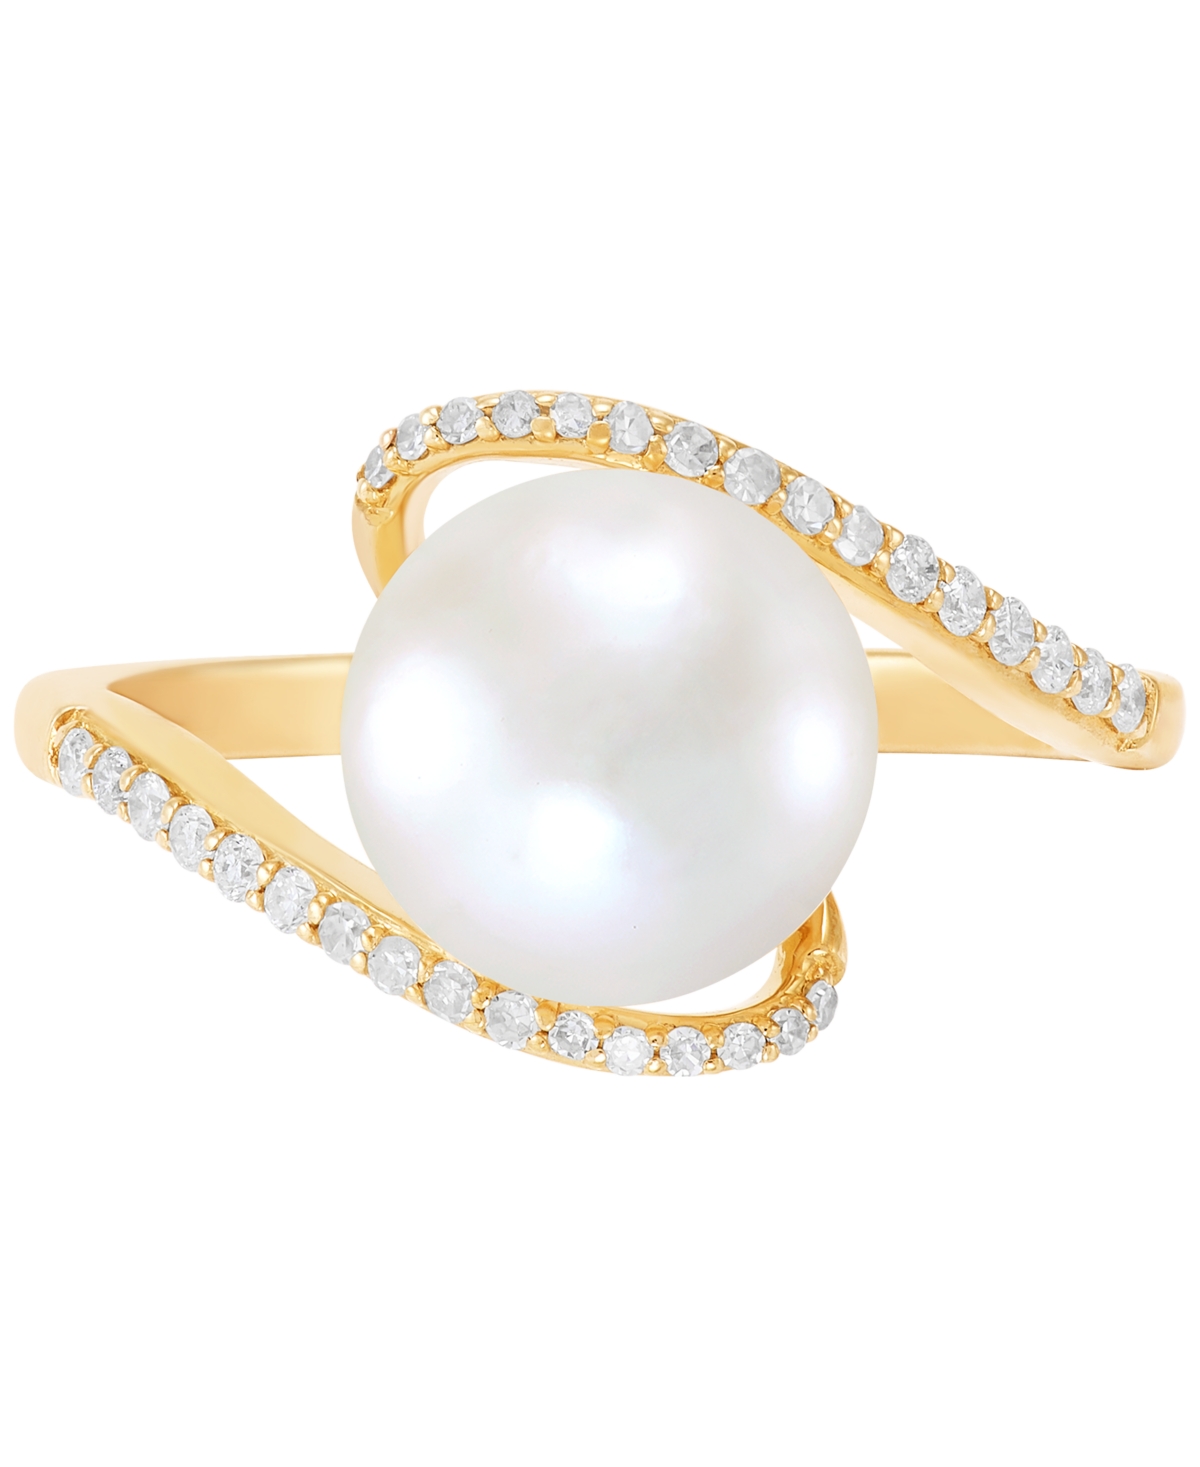 Cultured Freshwater Pearl (9mm) & Diamond (1/6 ct. t.w.) Swirl Ring in 10k Gold - Yellow Gold